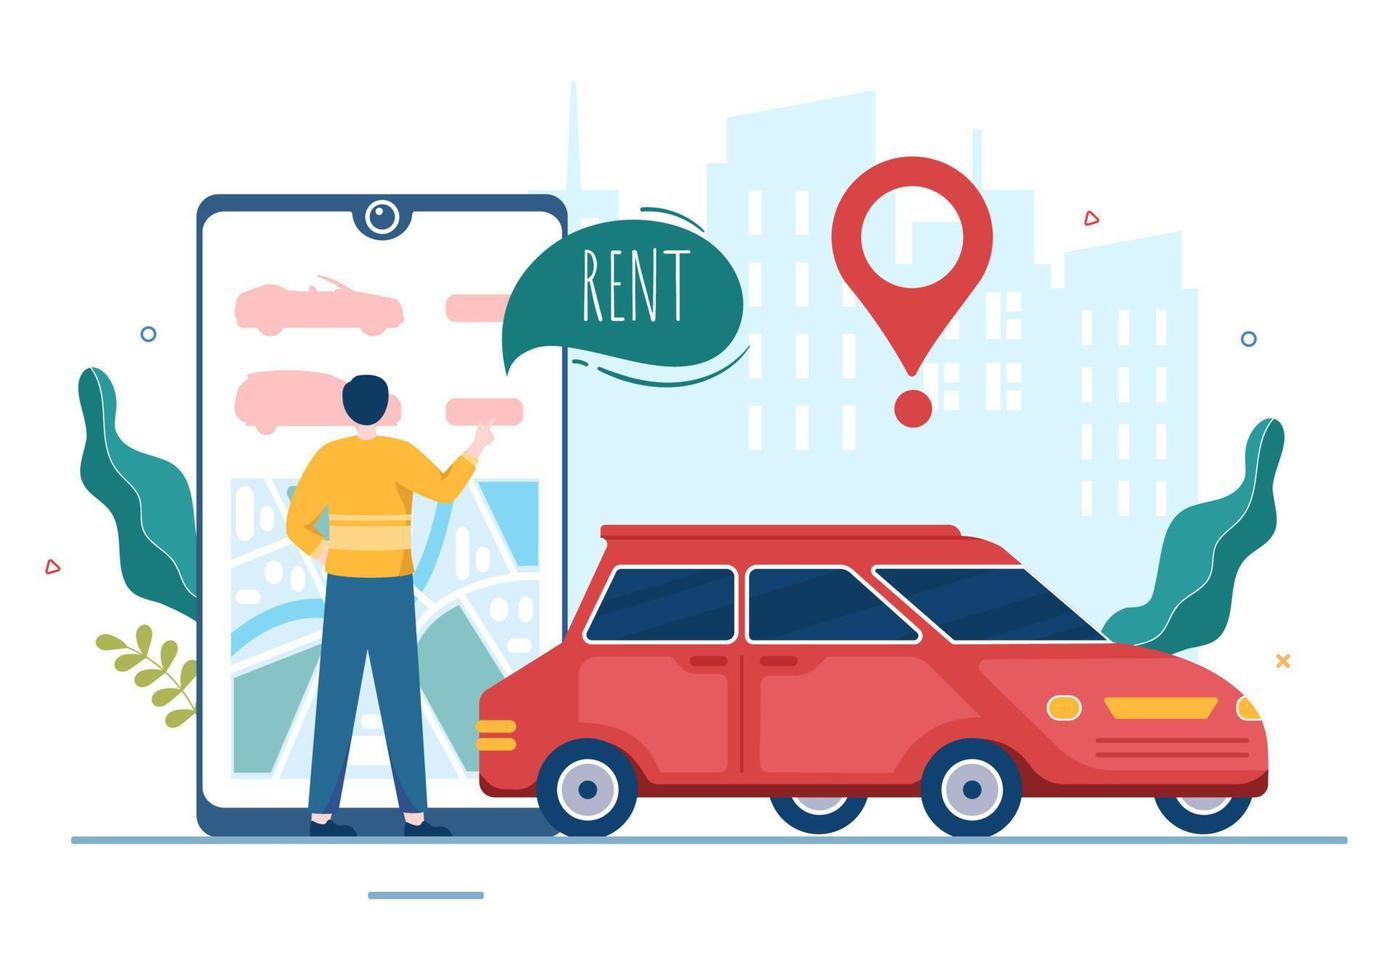 Car Rental, Booking Reservation and Sharing using Service Mobile Application with Route or Points Location in Hand Drawn Cartoon Flat Illustration vector